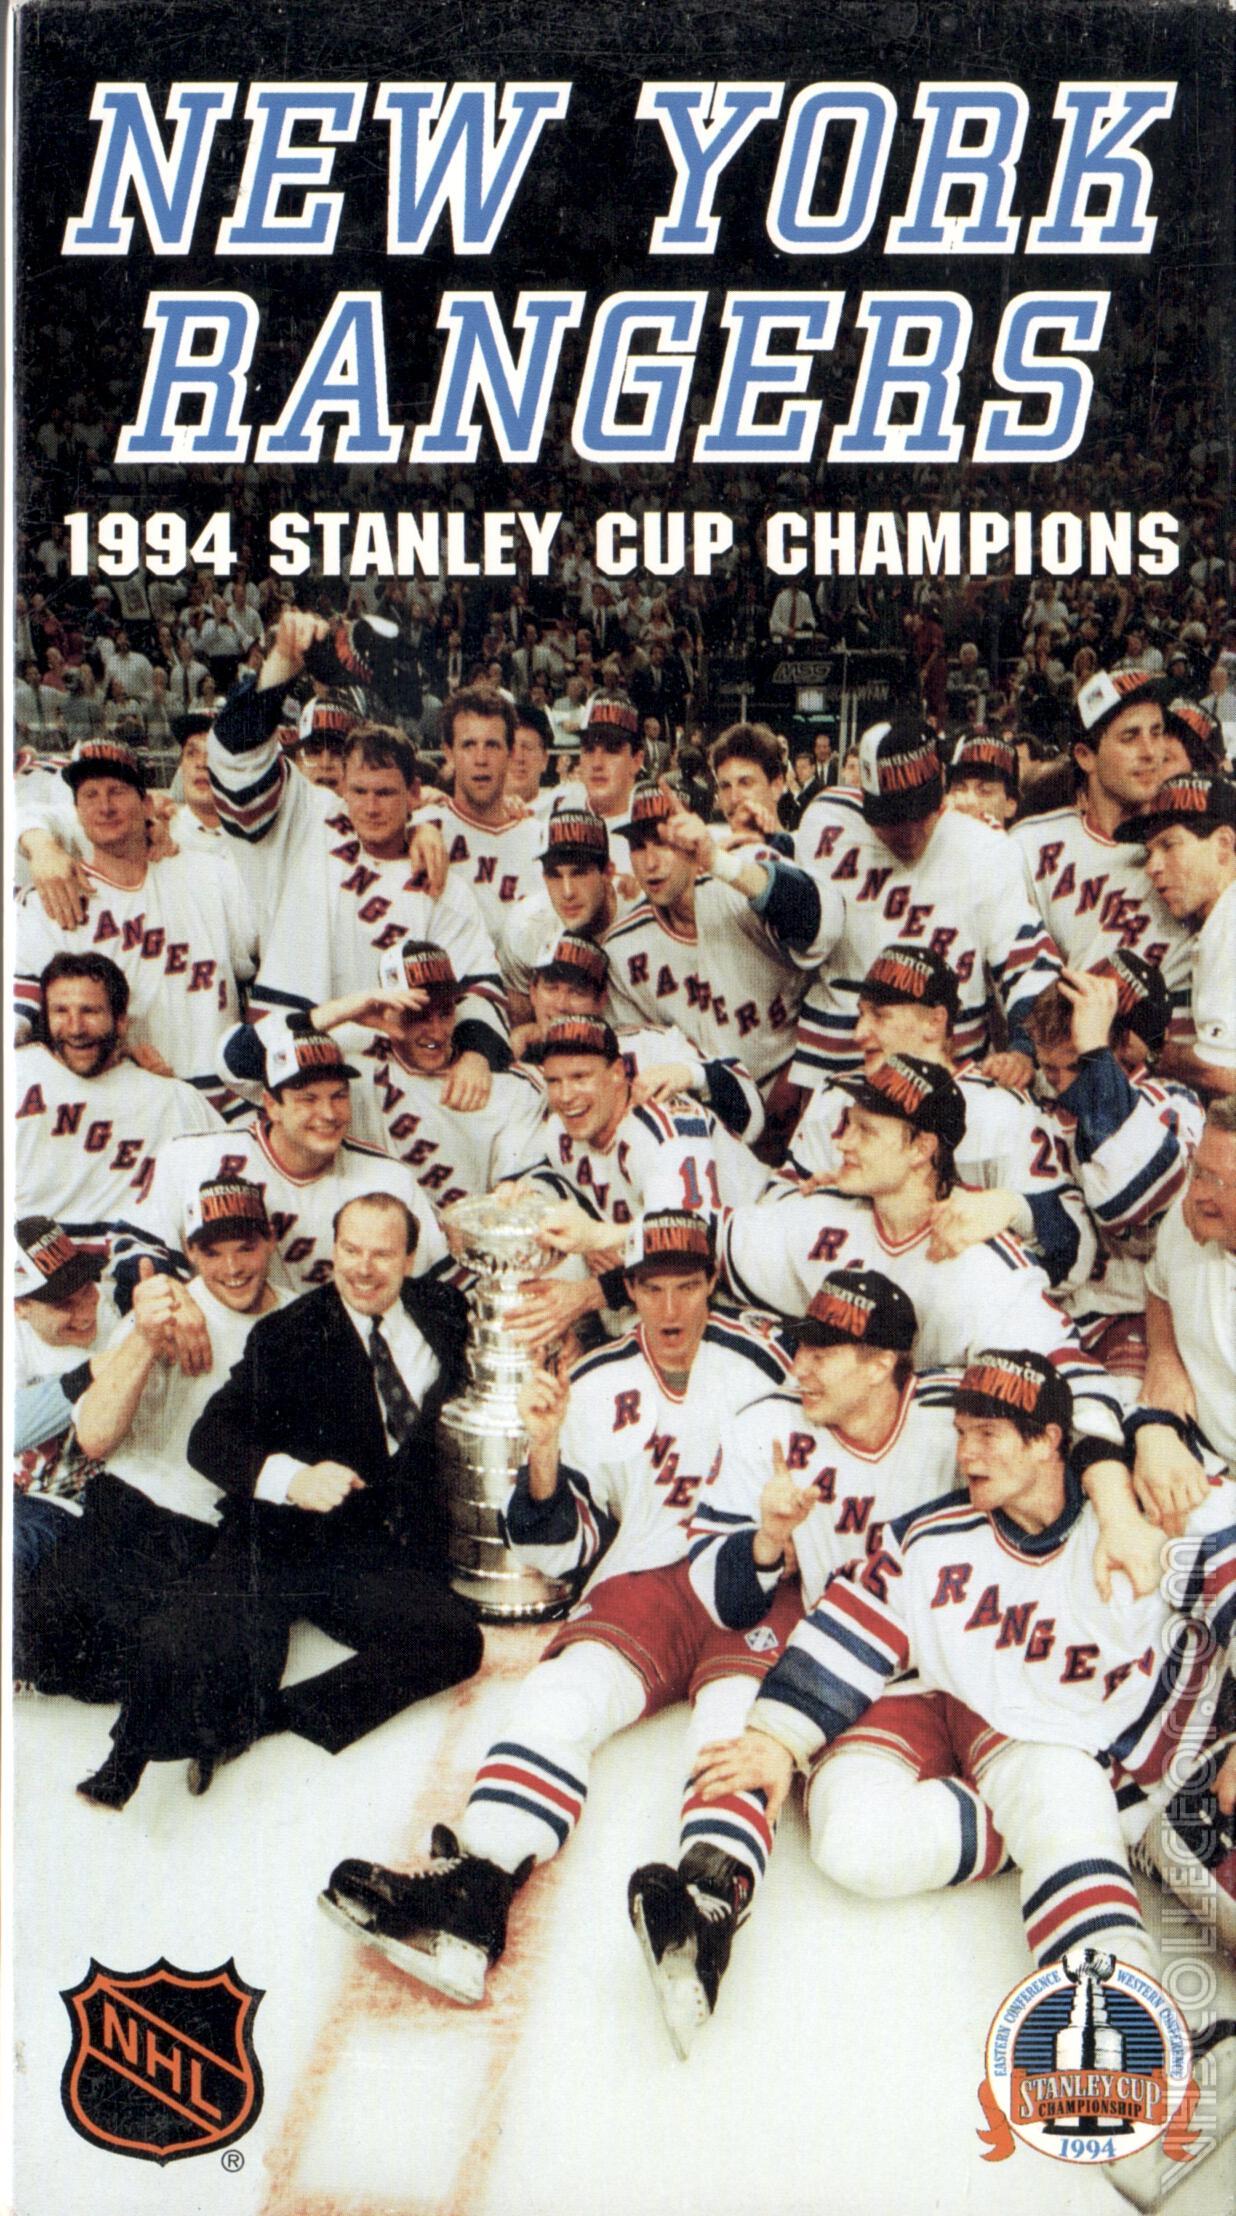 Oral History: The 1994 New York Rangers Cup run - The Hockey News